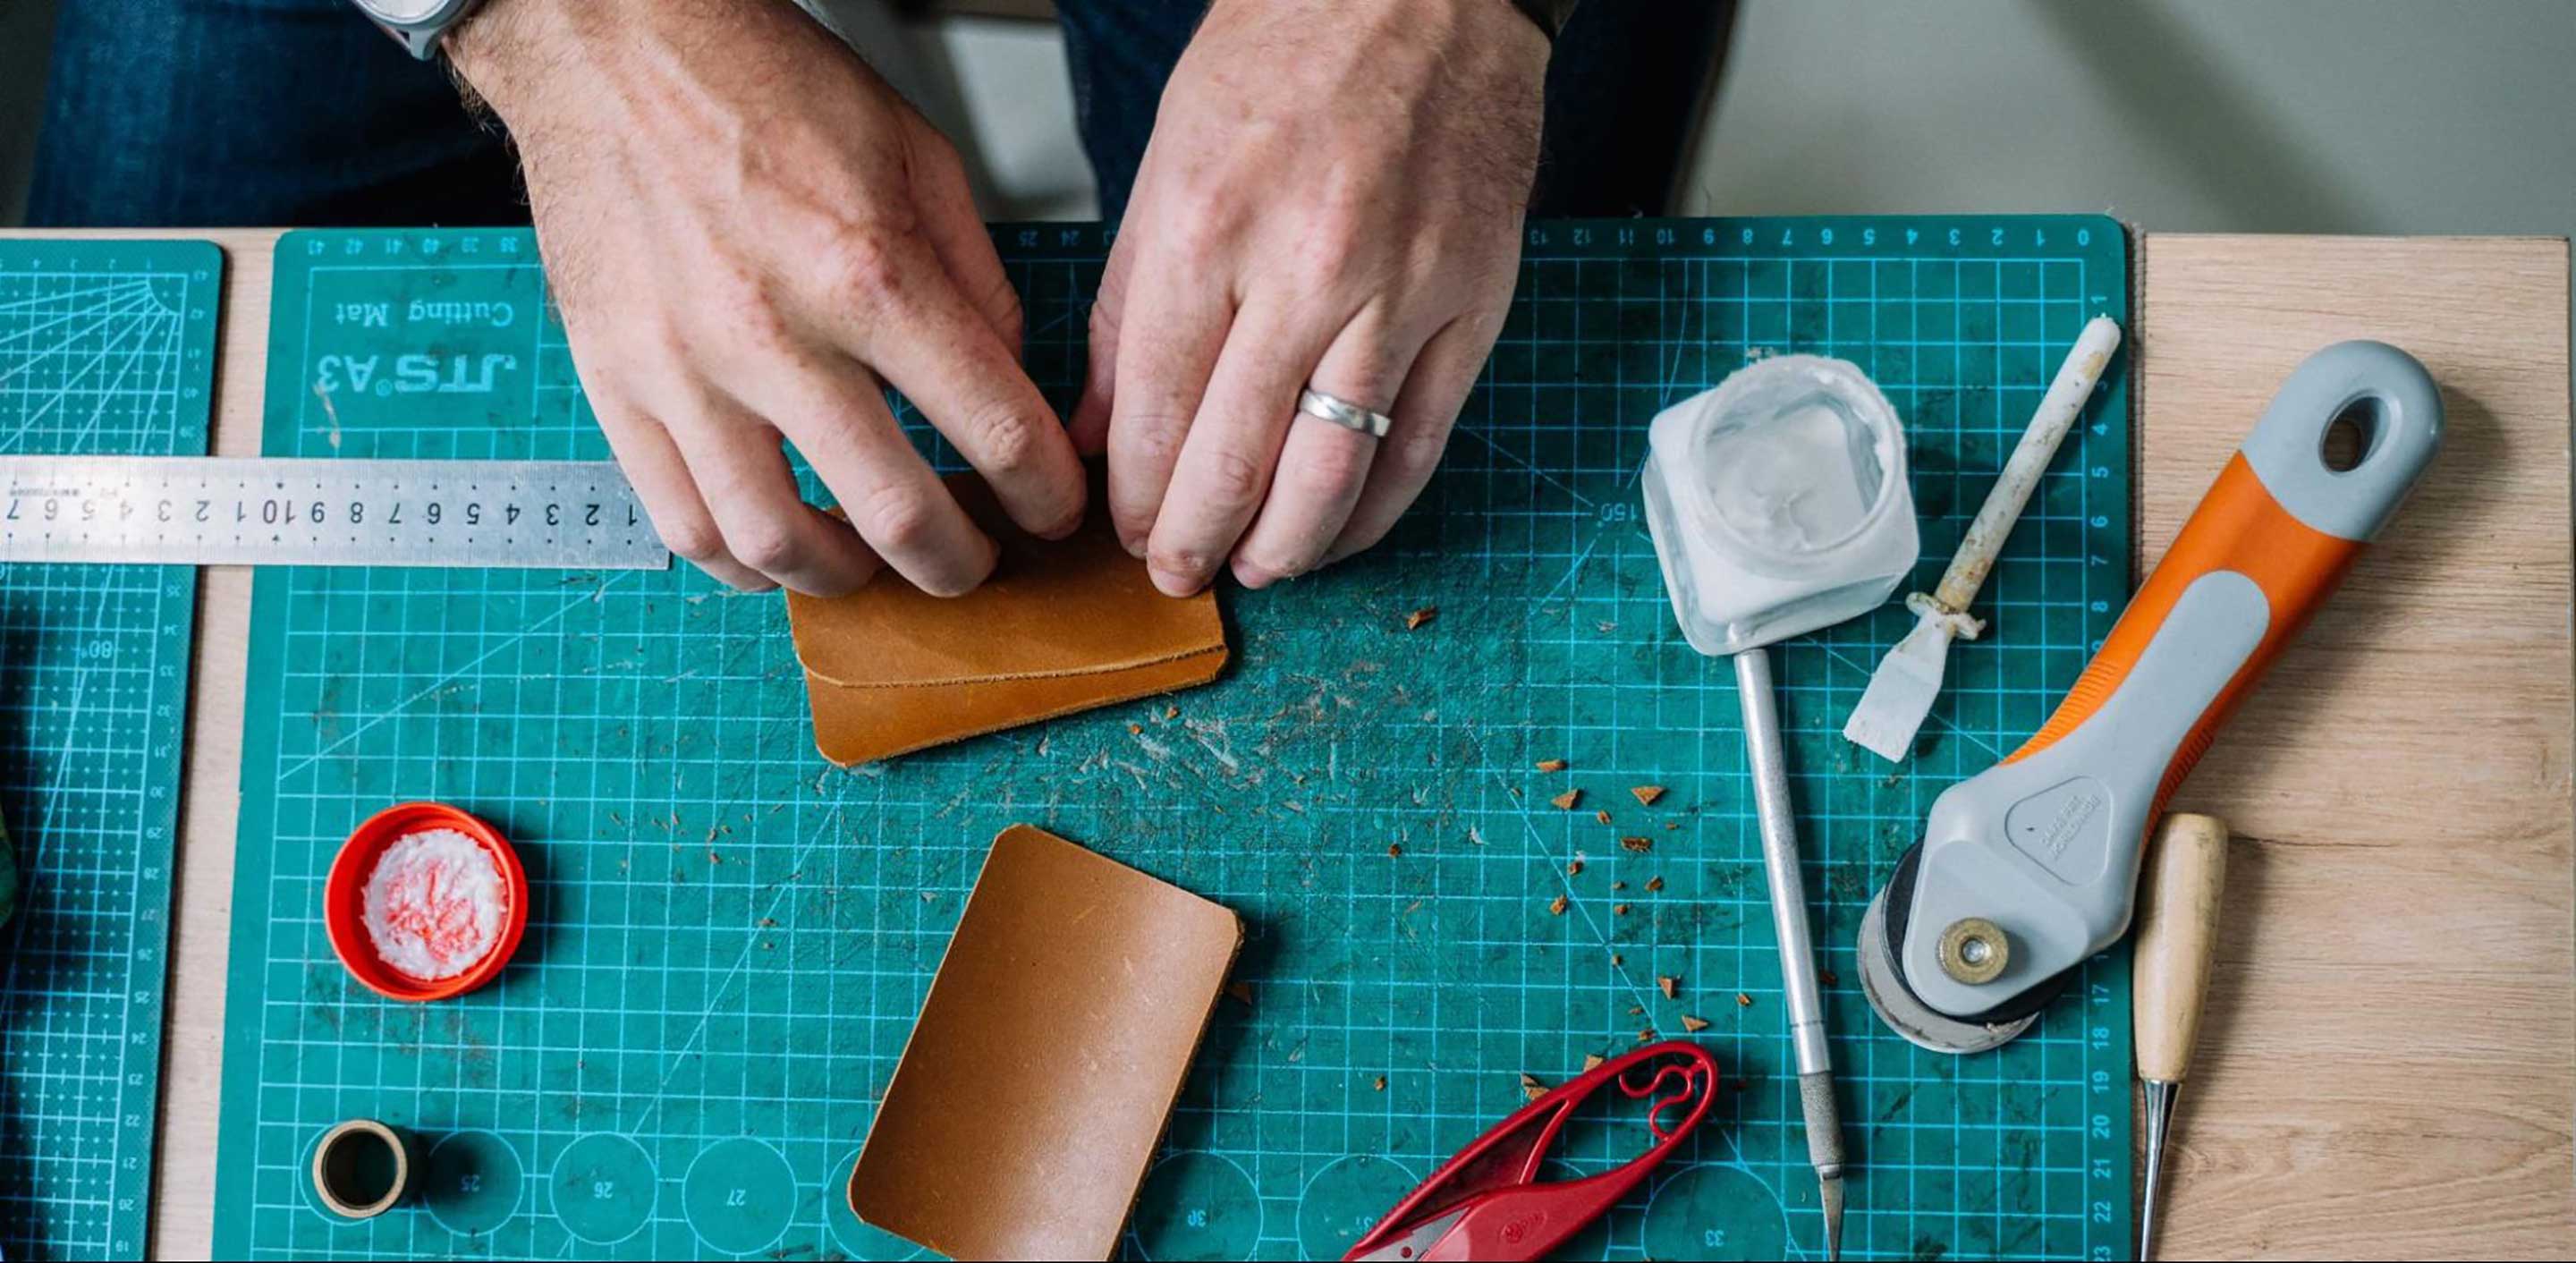 What is the BEST leather glue? 